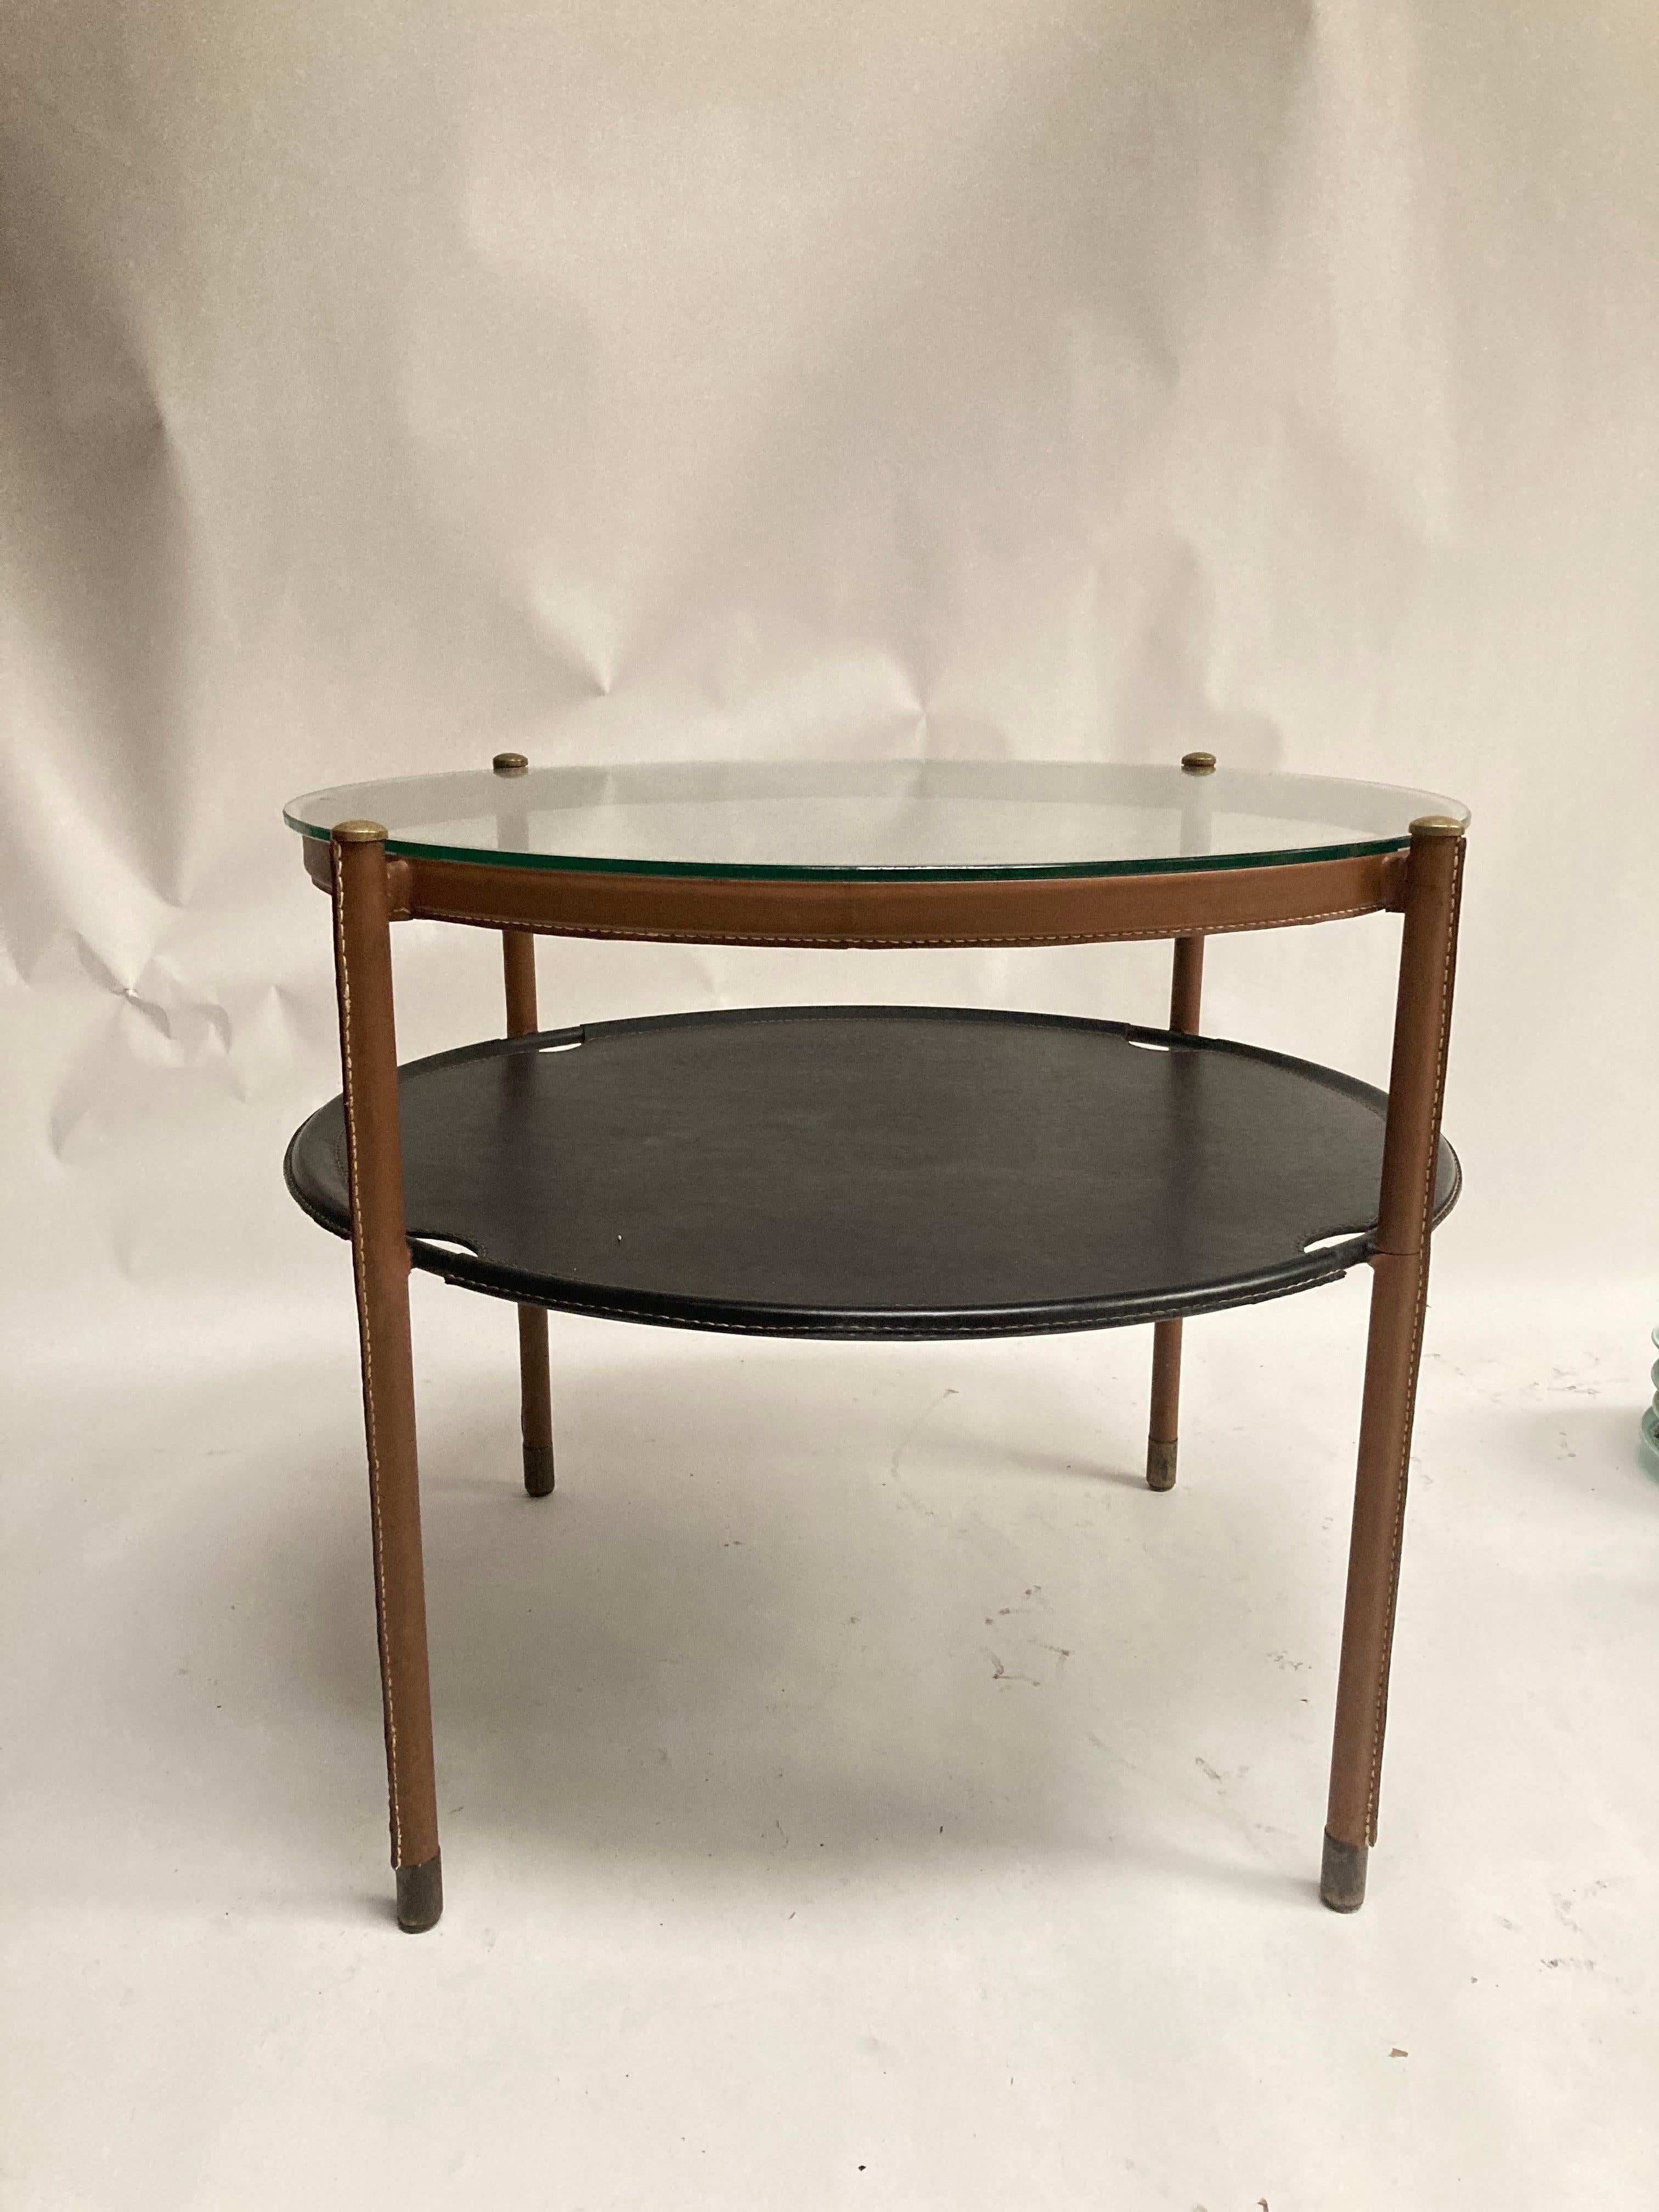 Rare Stitched Leather table by Jacques Adnet
Model not very common 
Great dimensions.